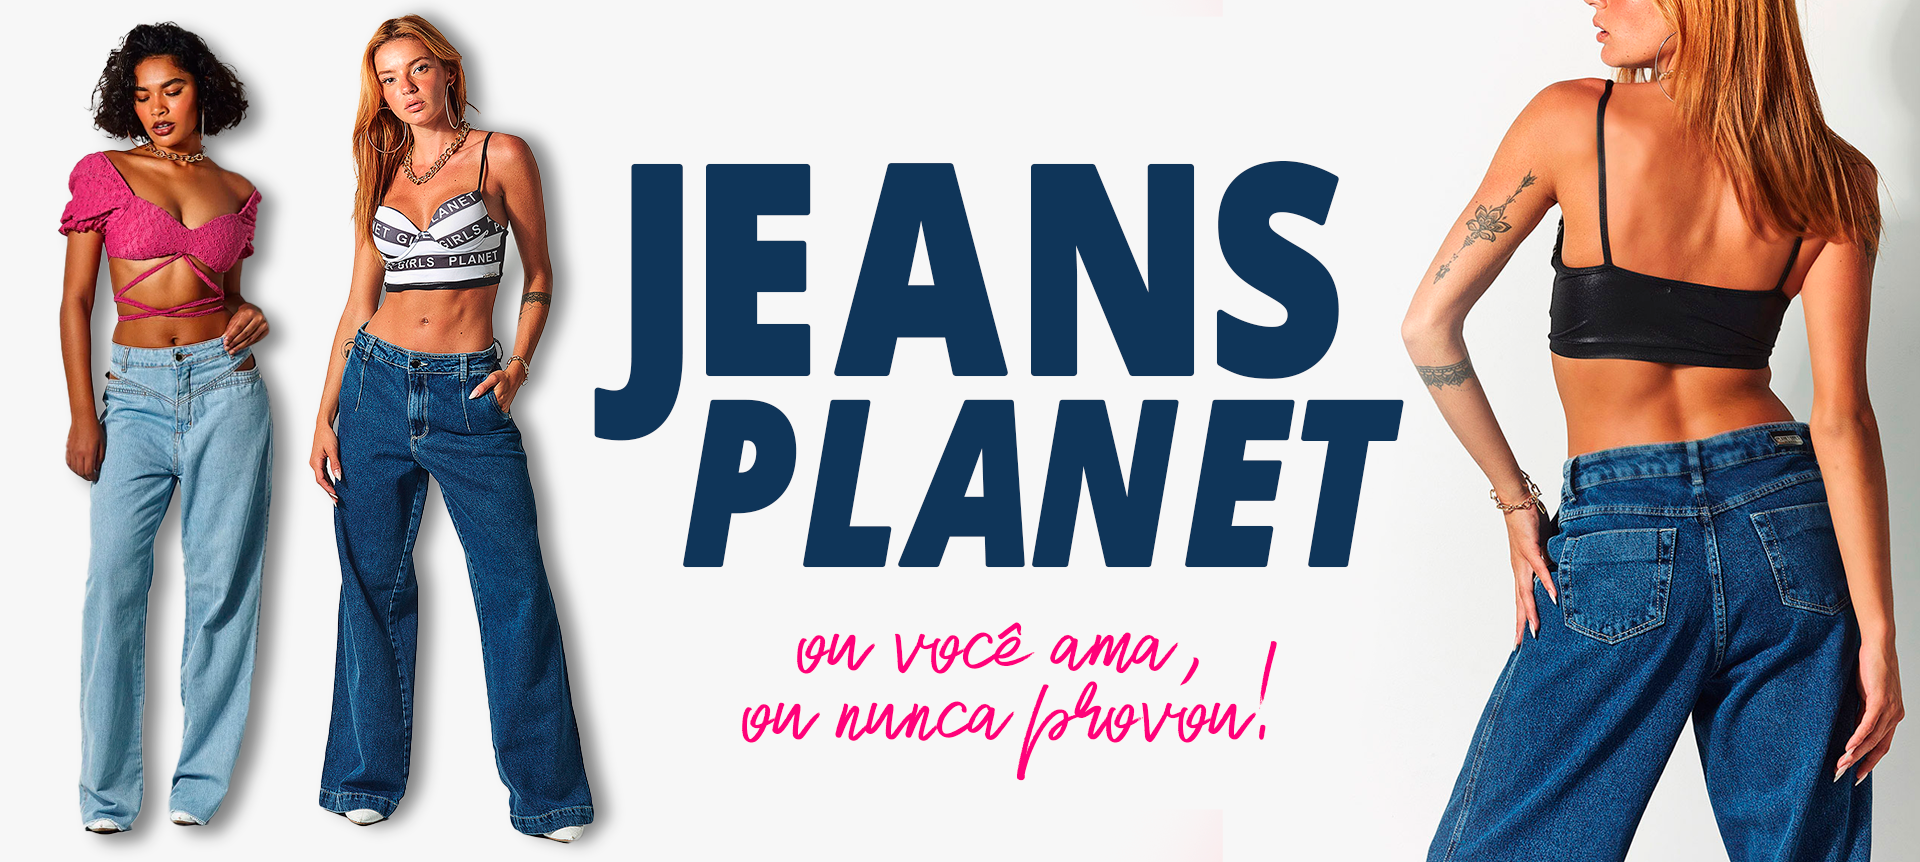 Jeans Planet Girls 1920x862